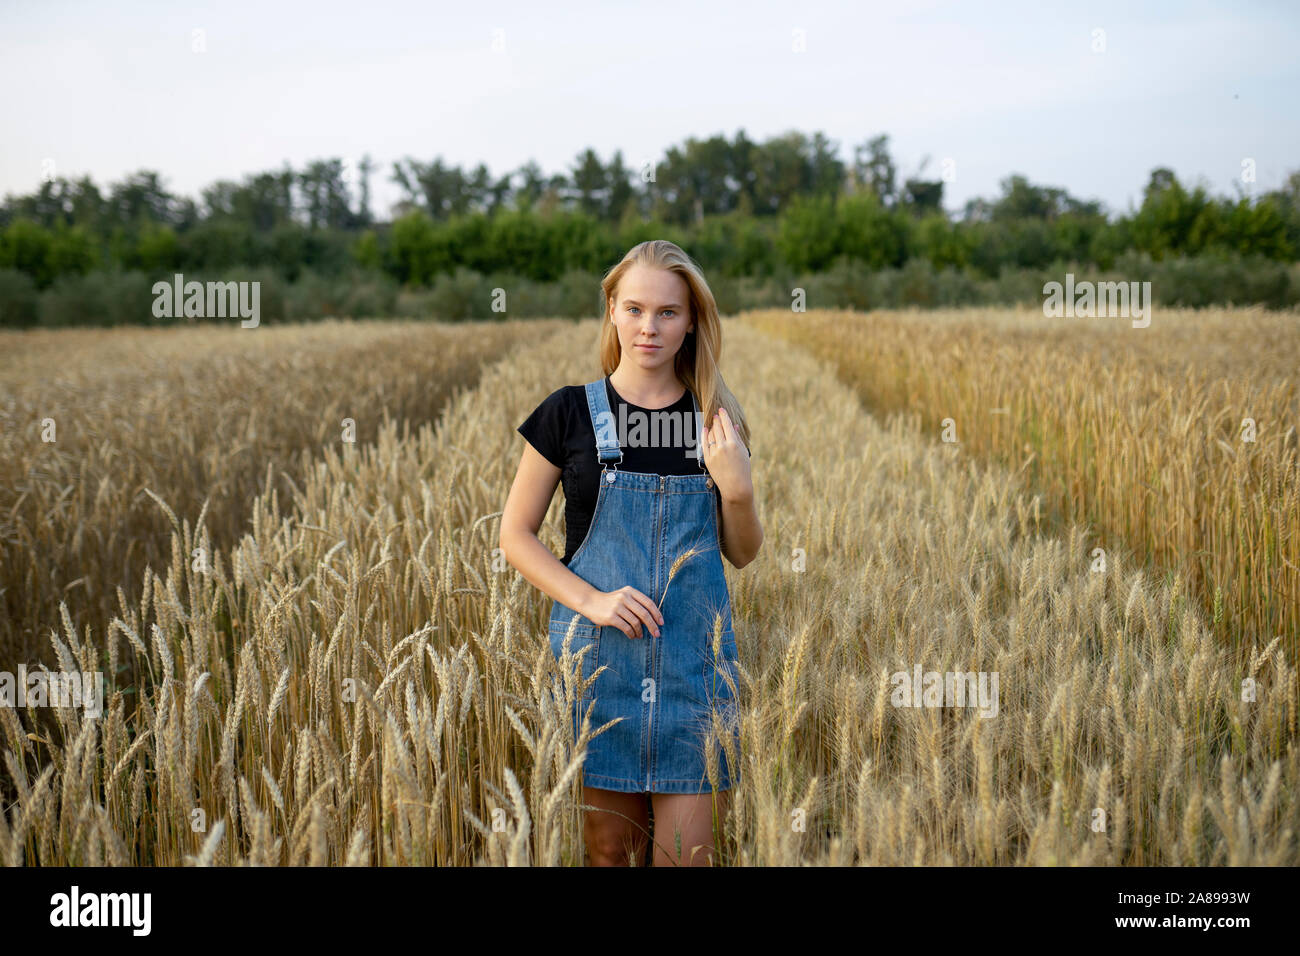 Young woman wearing overall dress in wheat field Stock Photo